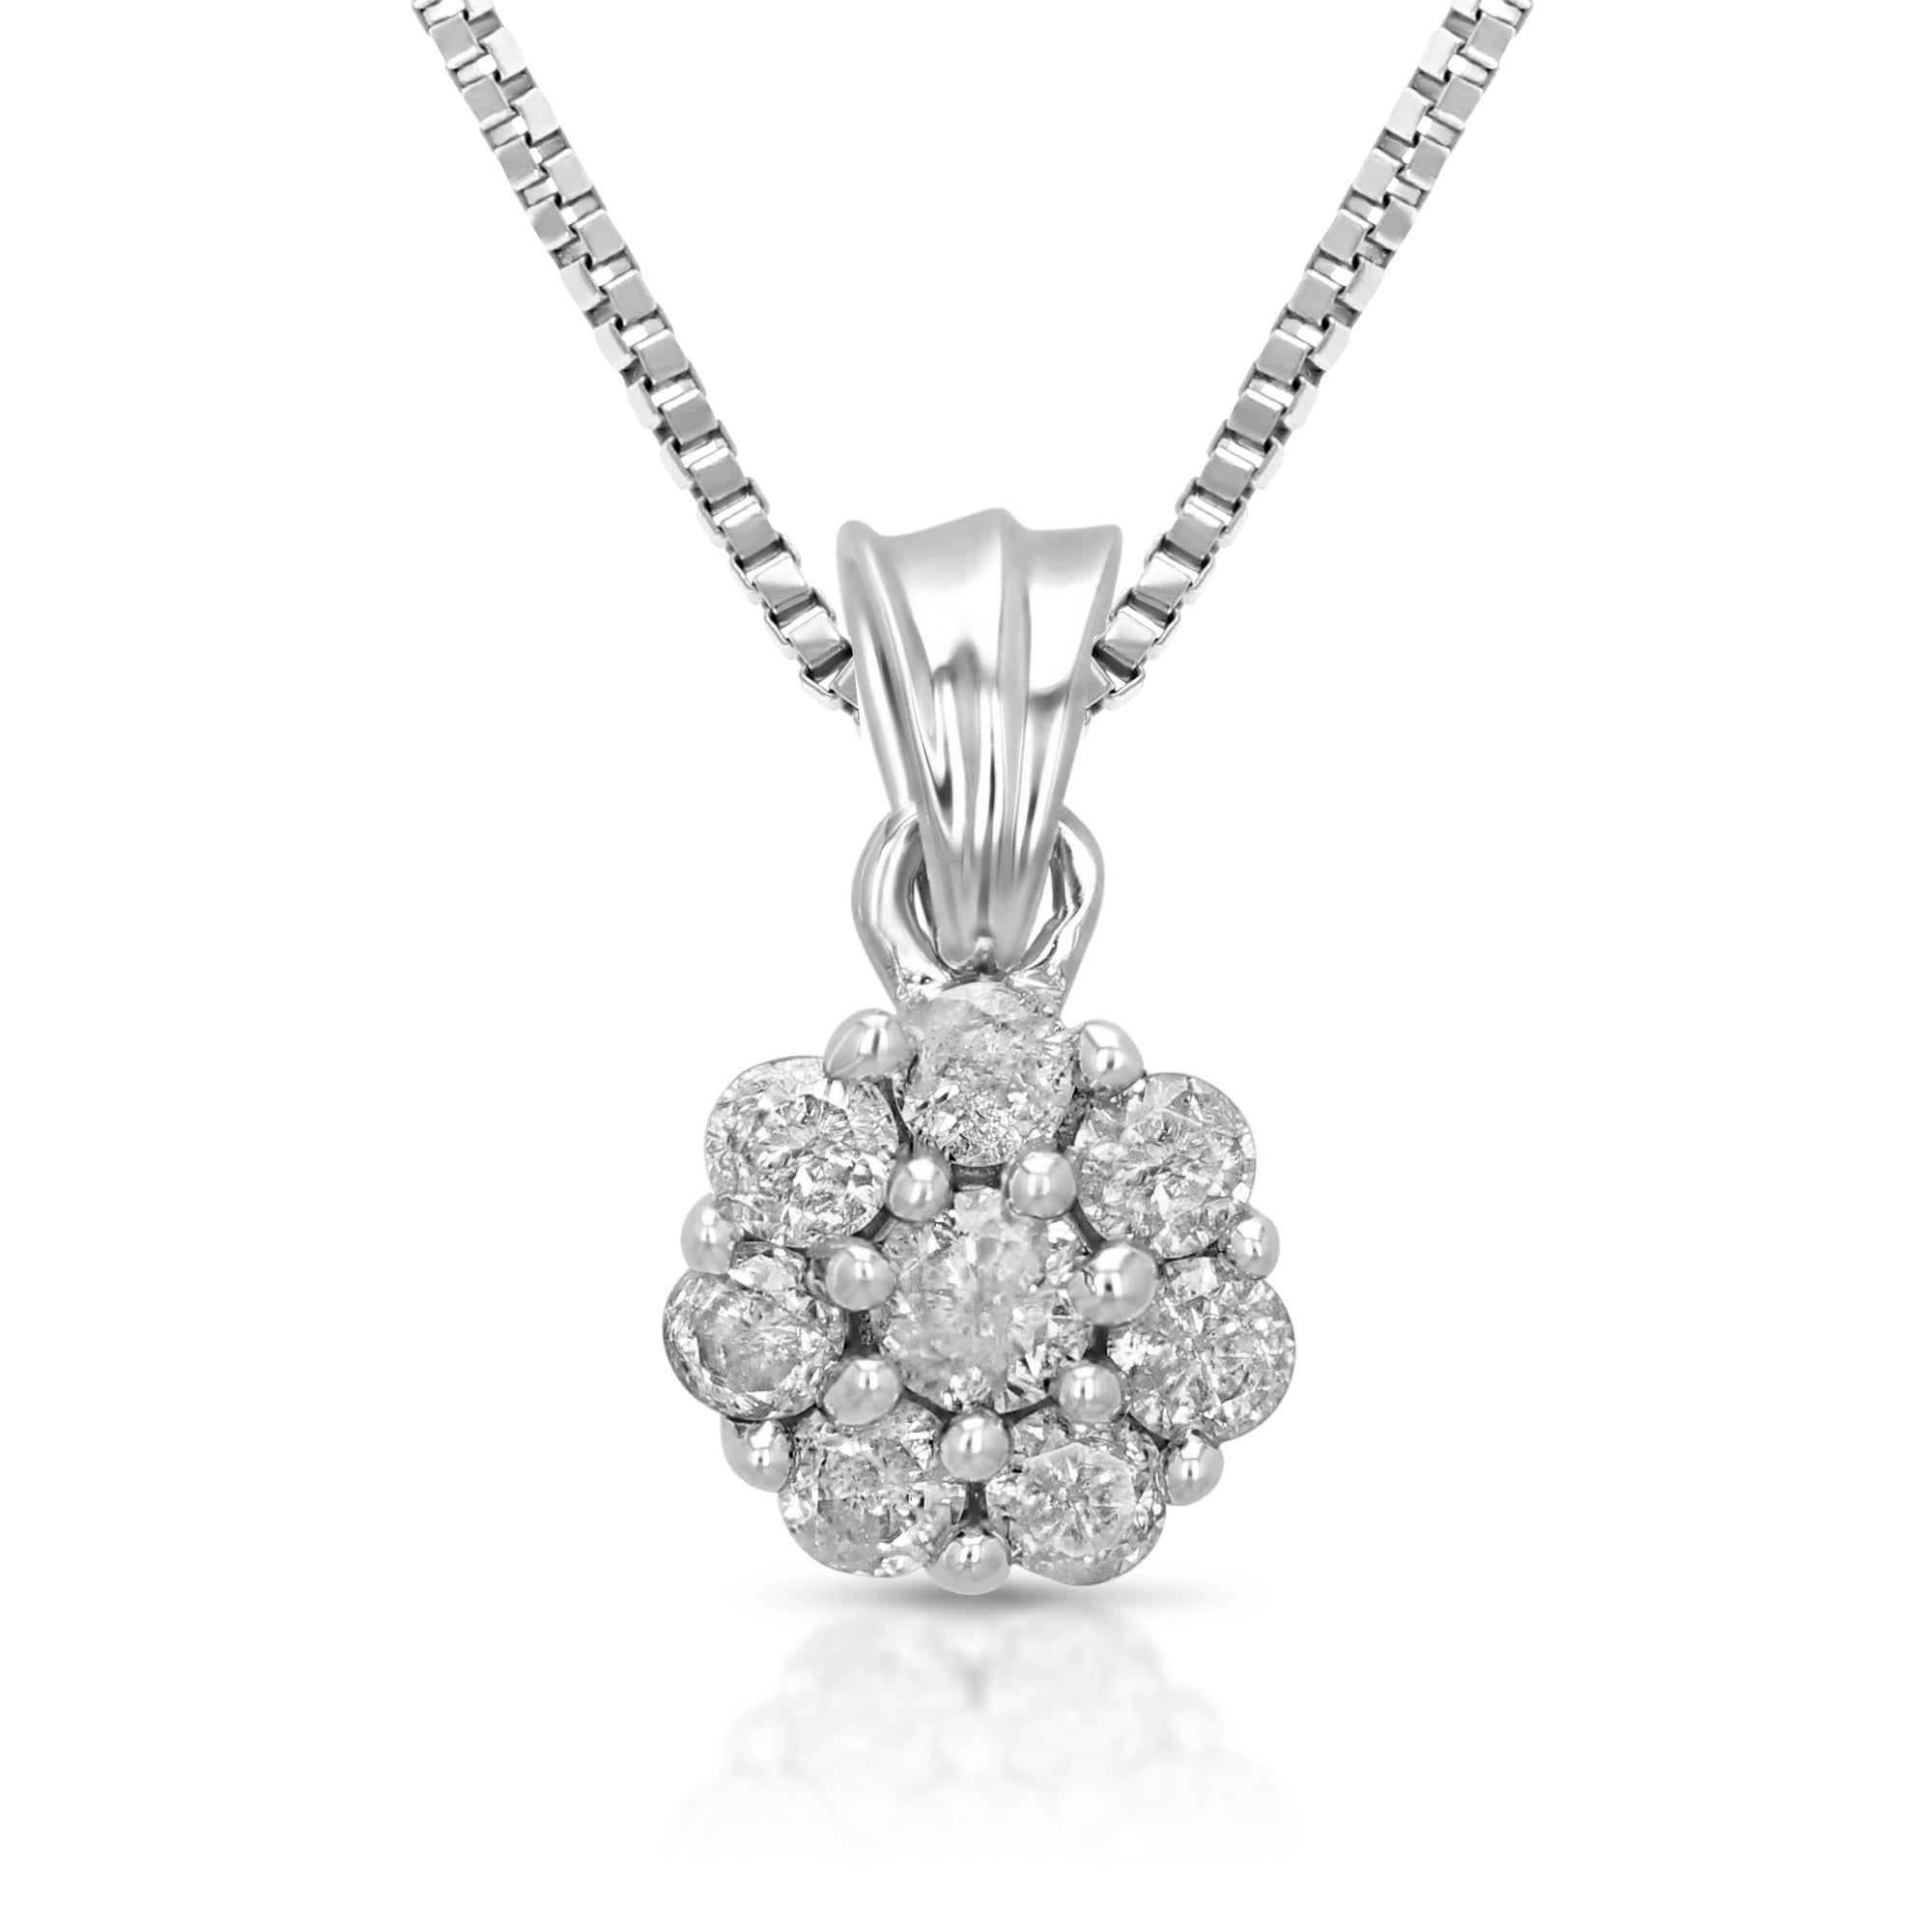 0.15 cttw Diamond Cluster Pendant Necklace 14K White Gold With 18 Inch Chain